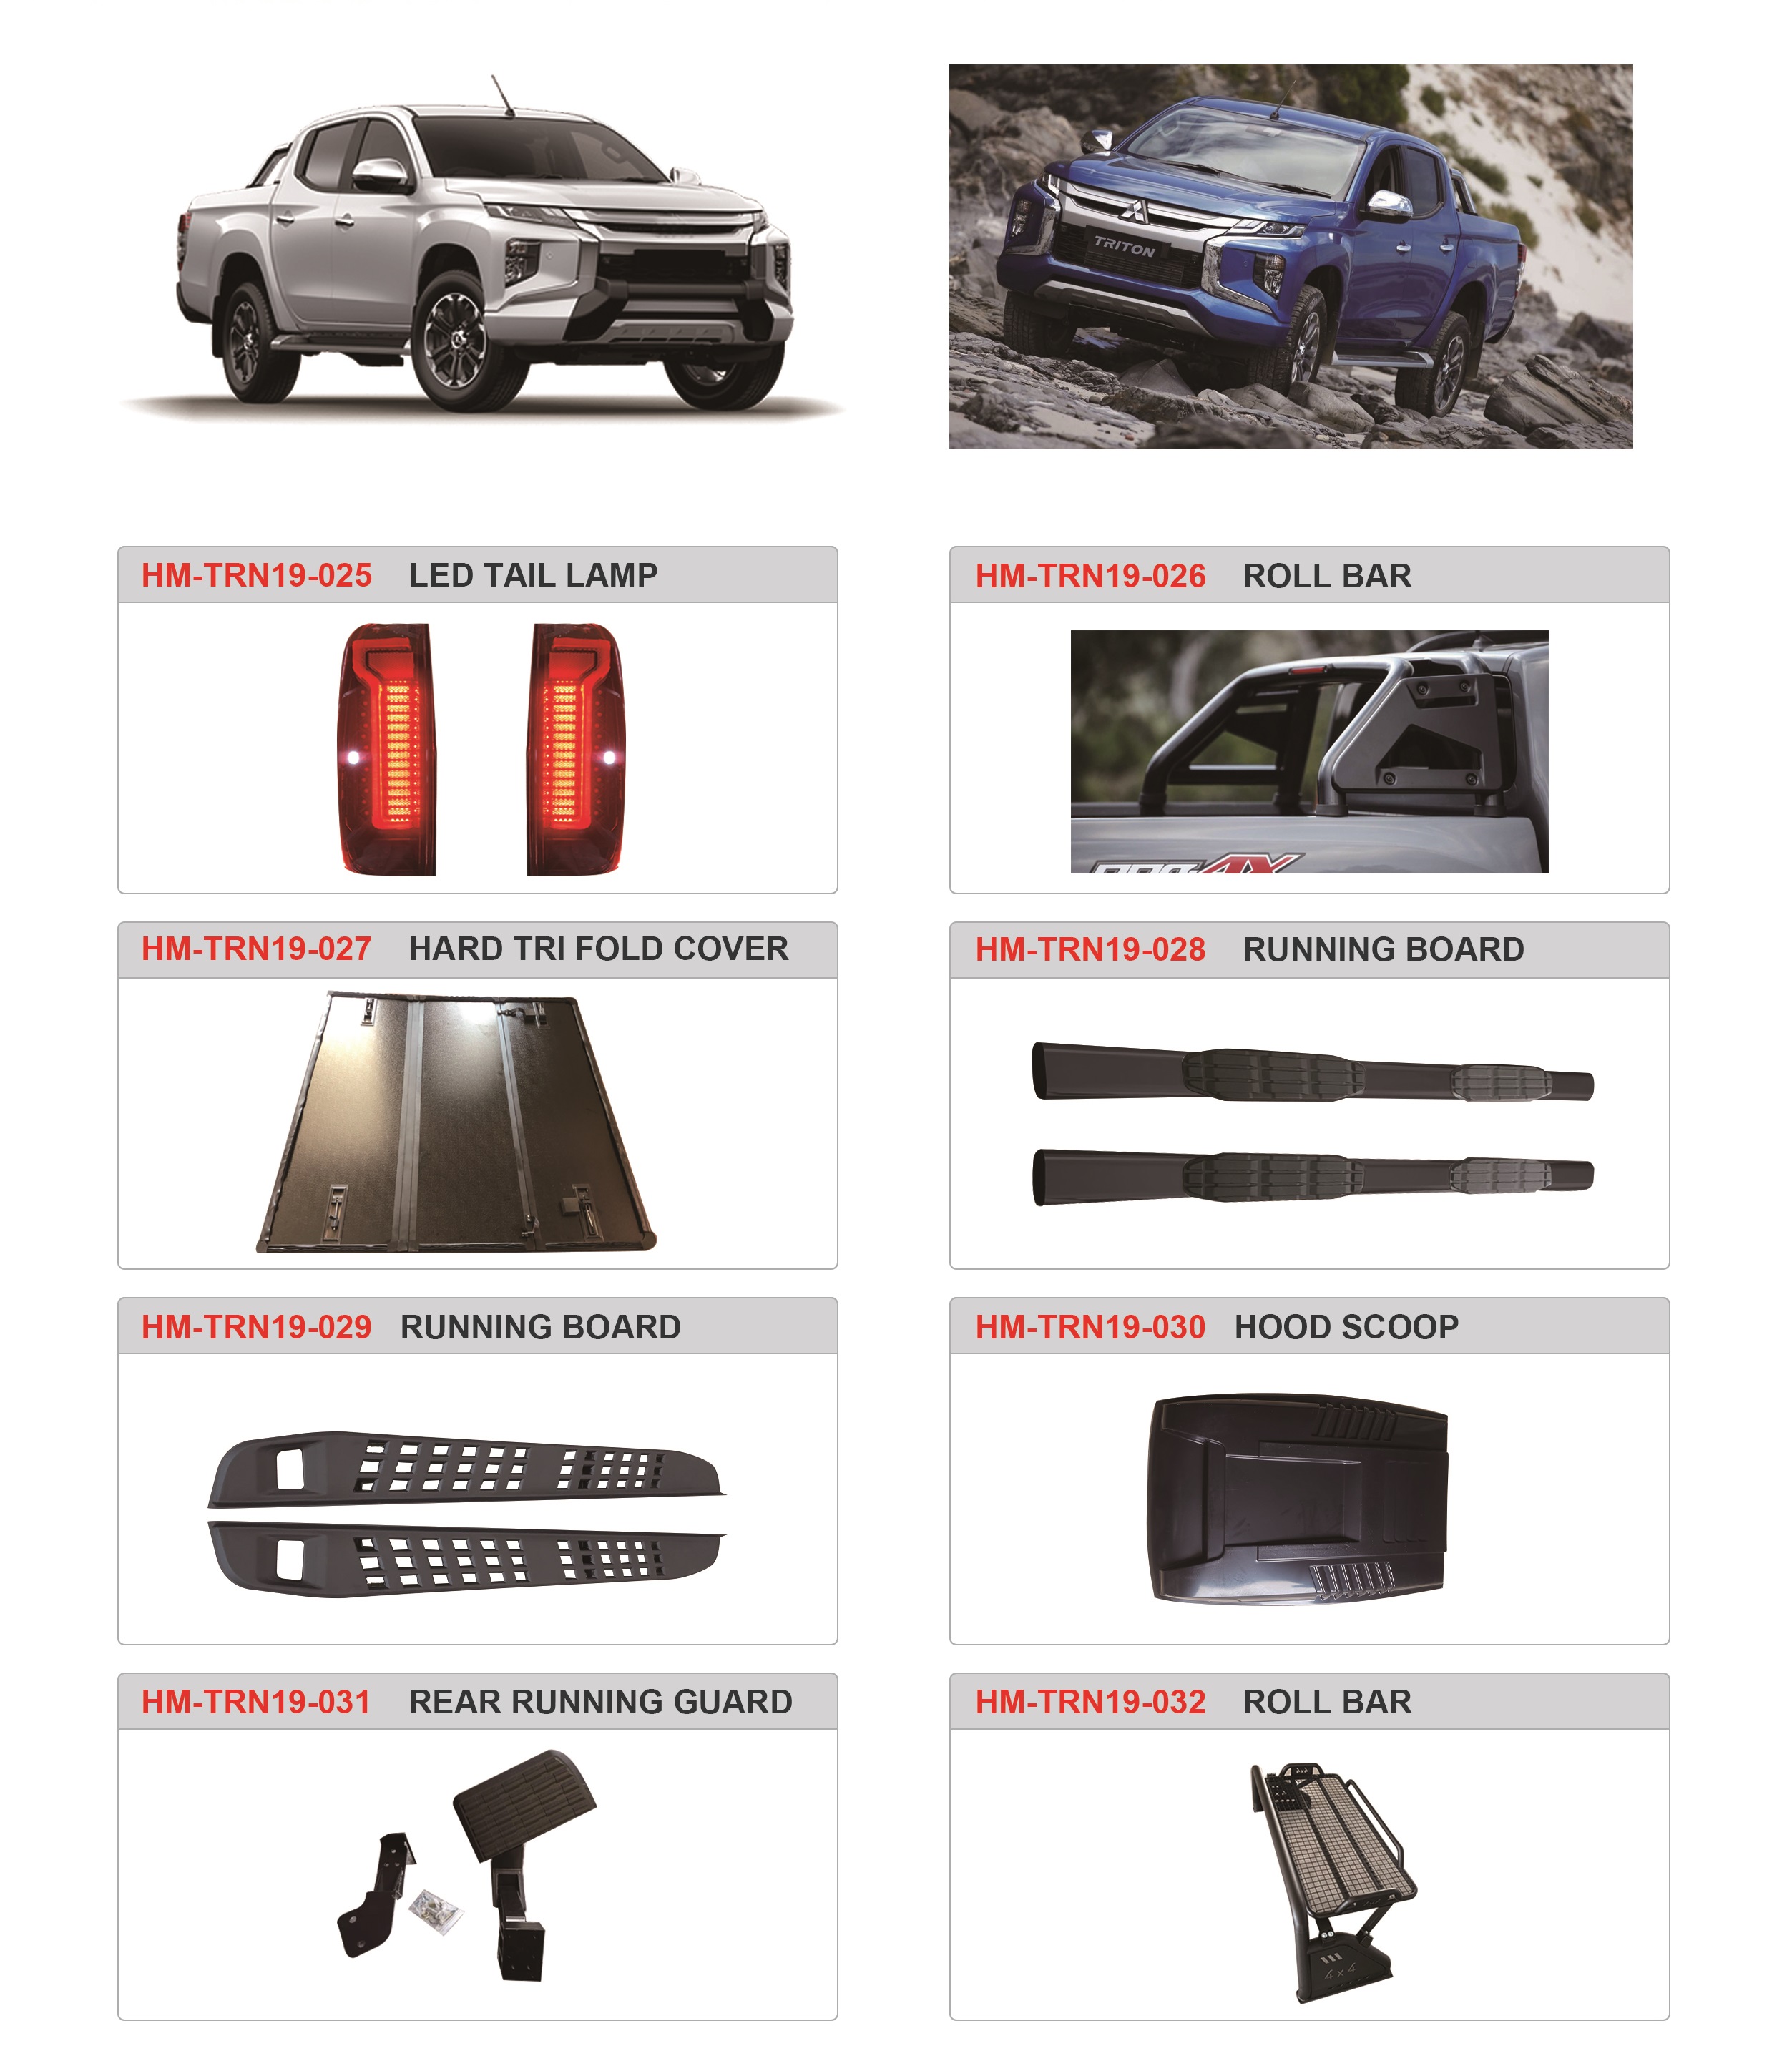 FOR 2019+ TRITON L200 LED TAIL LAMP Featured Image